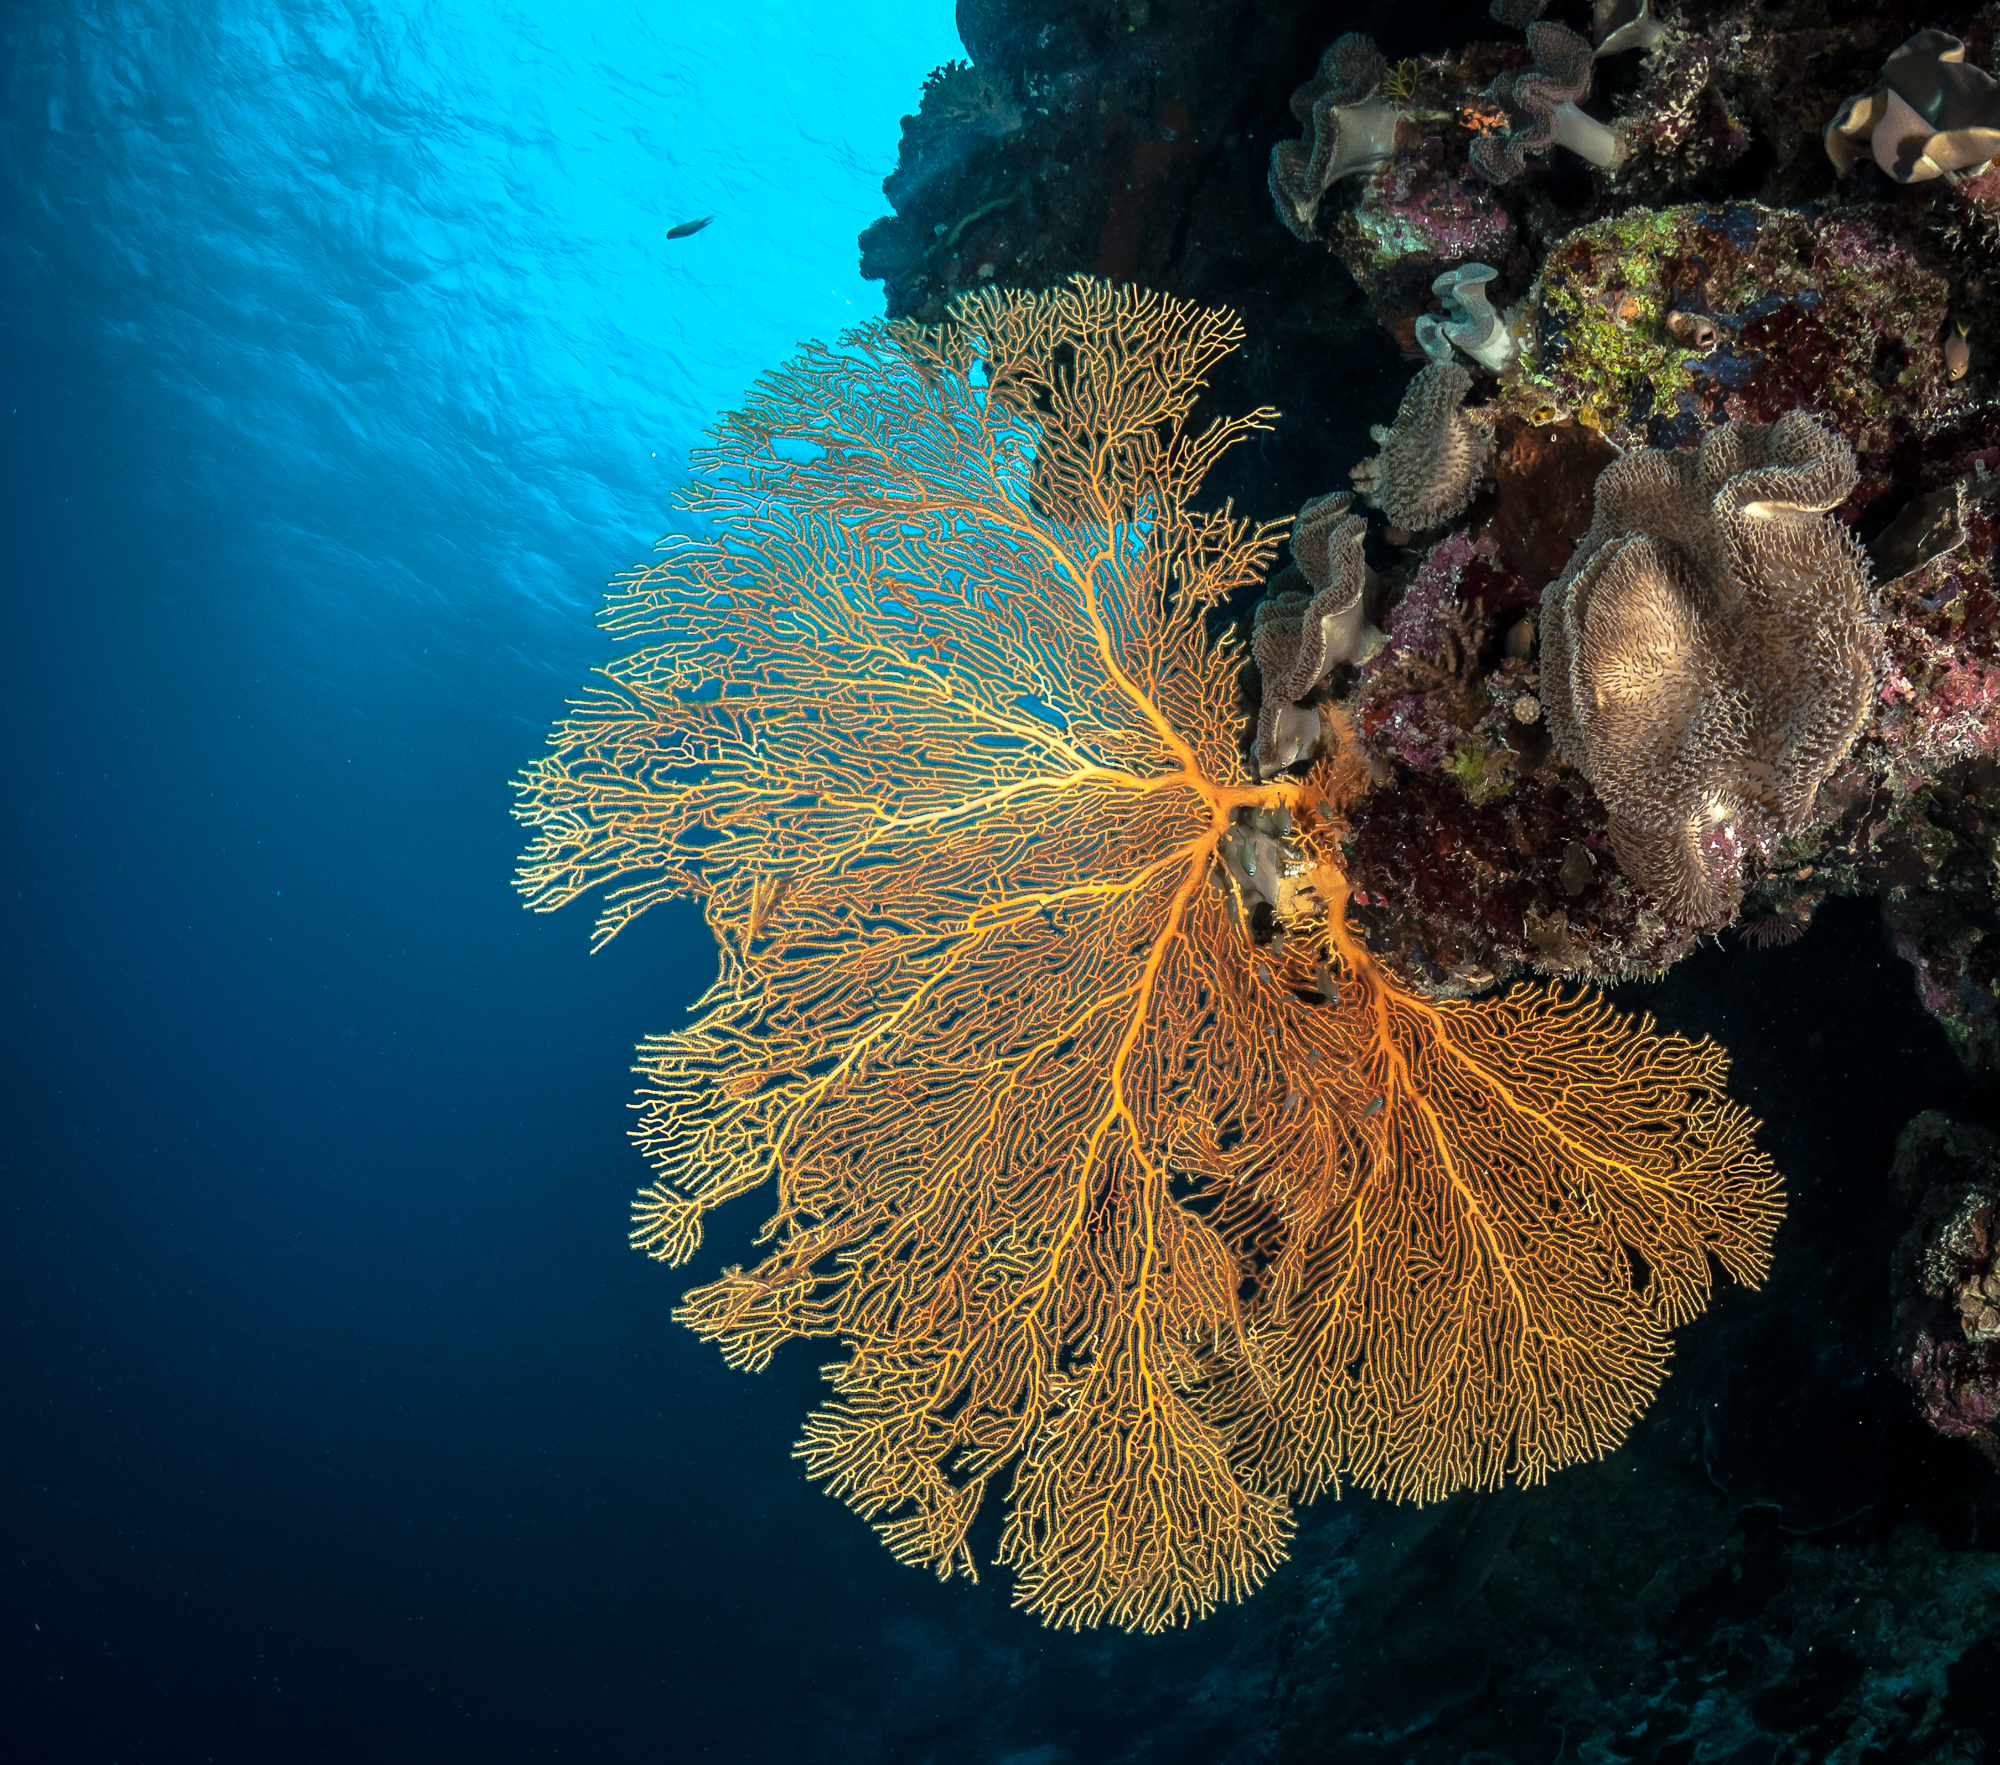 A photo of a yellow fan of coral jutting out from the rocky coral reef its attached to, underneath a blanket of blue ocean water